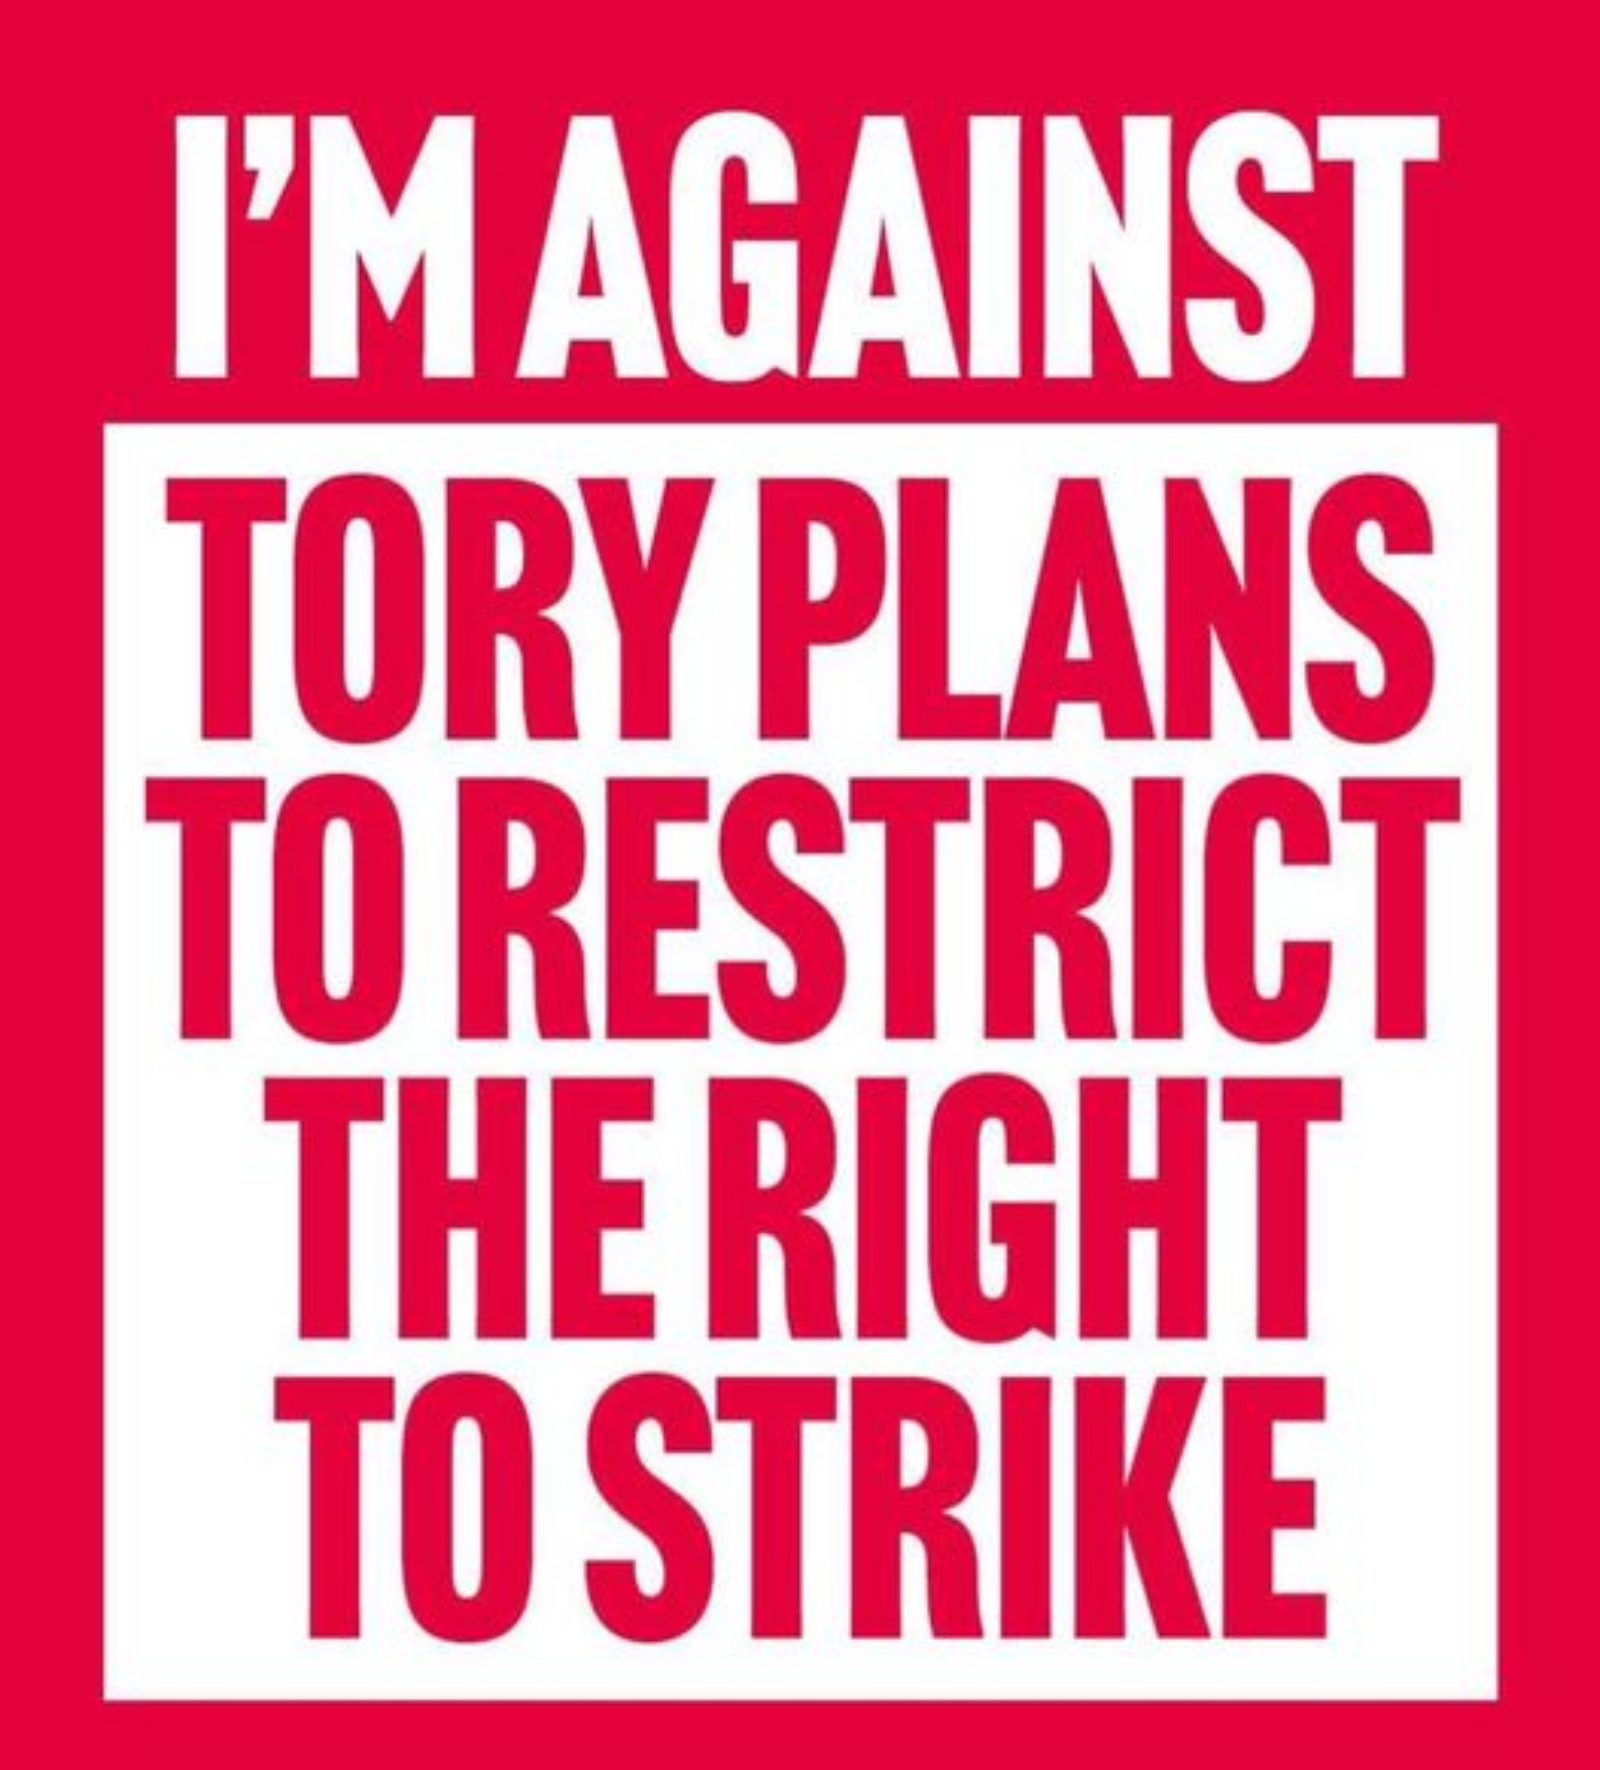 Im against torys plans to restrict the right to strike